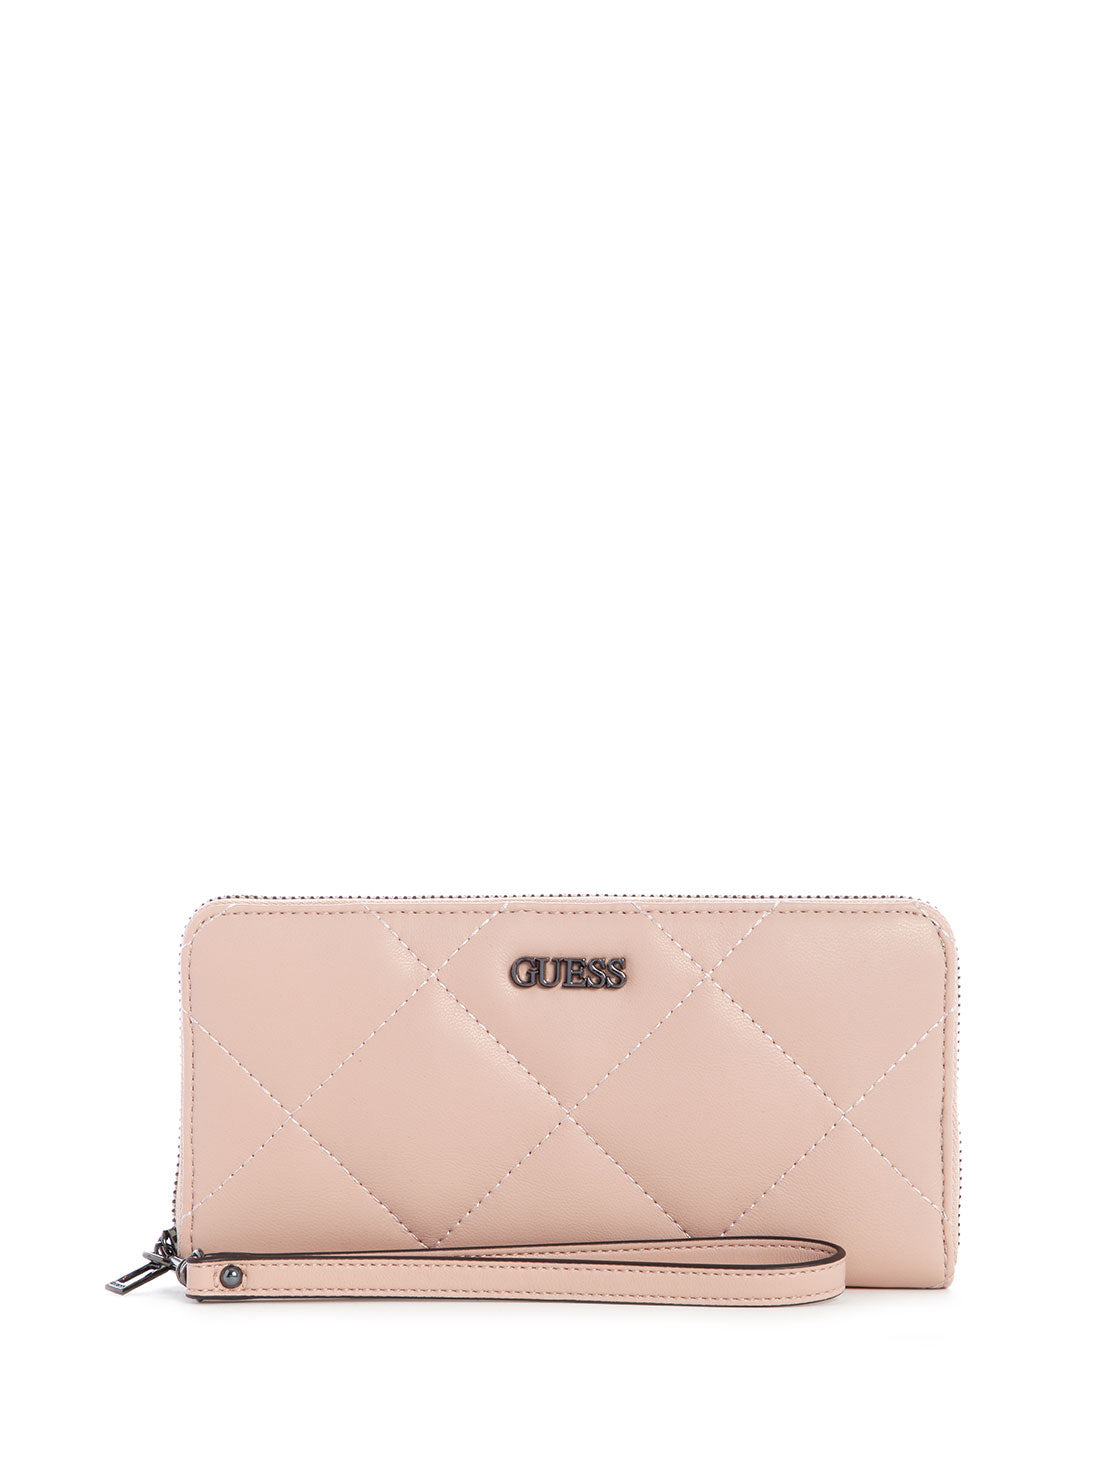 GUESS Womens Blush Pink Quilted Khatia Large Wallet QM838146 Front View